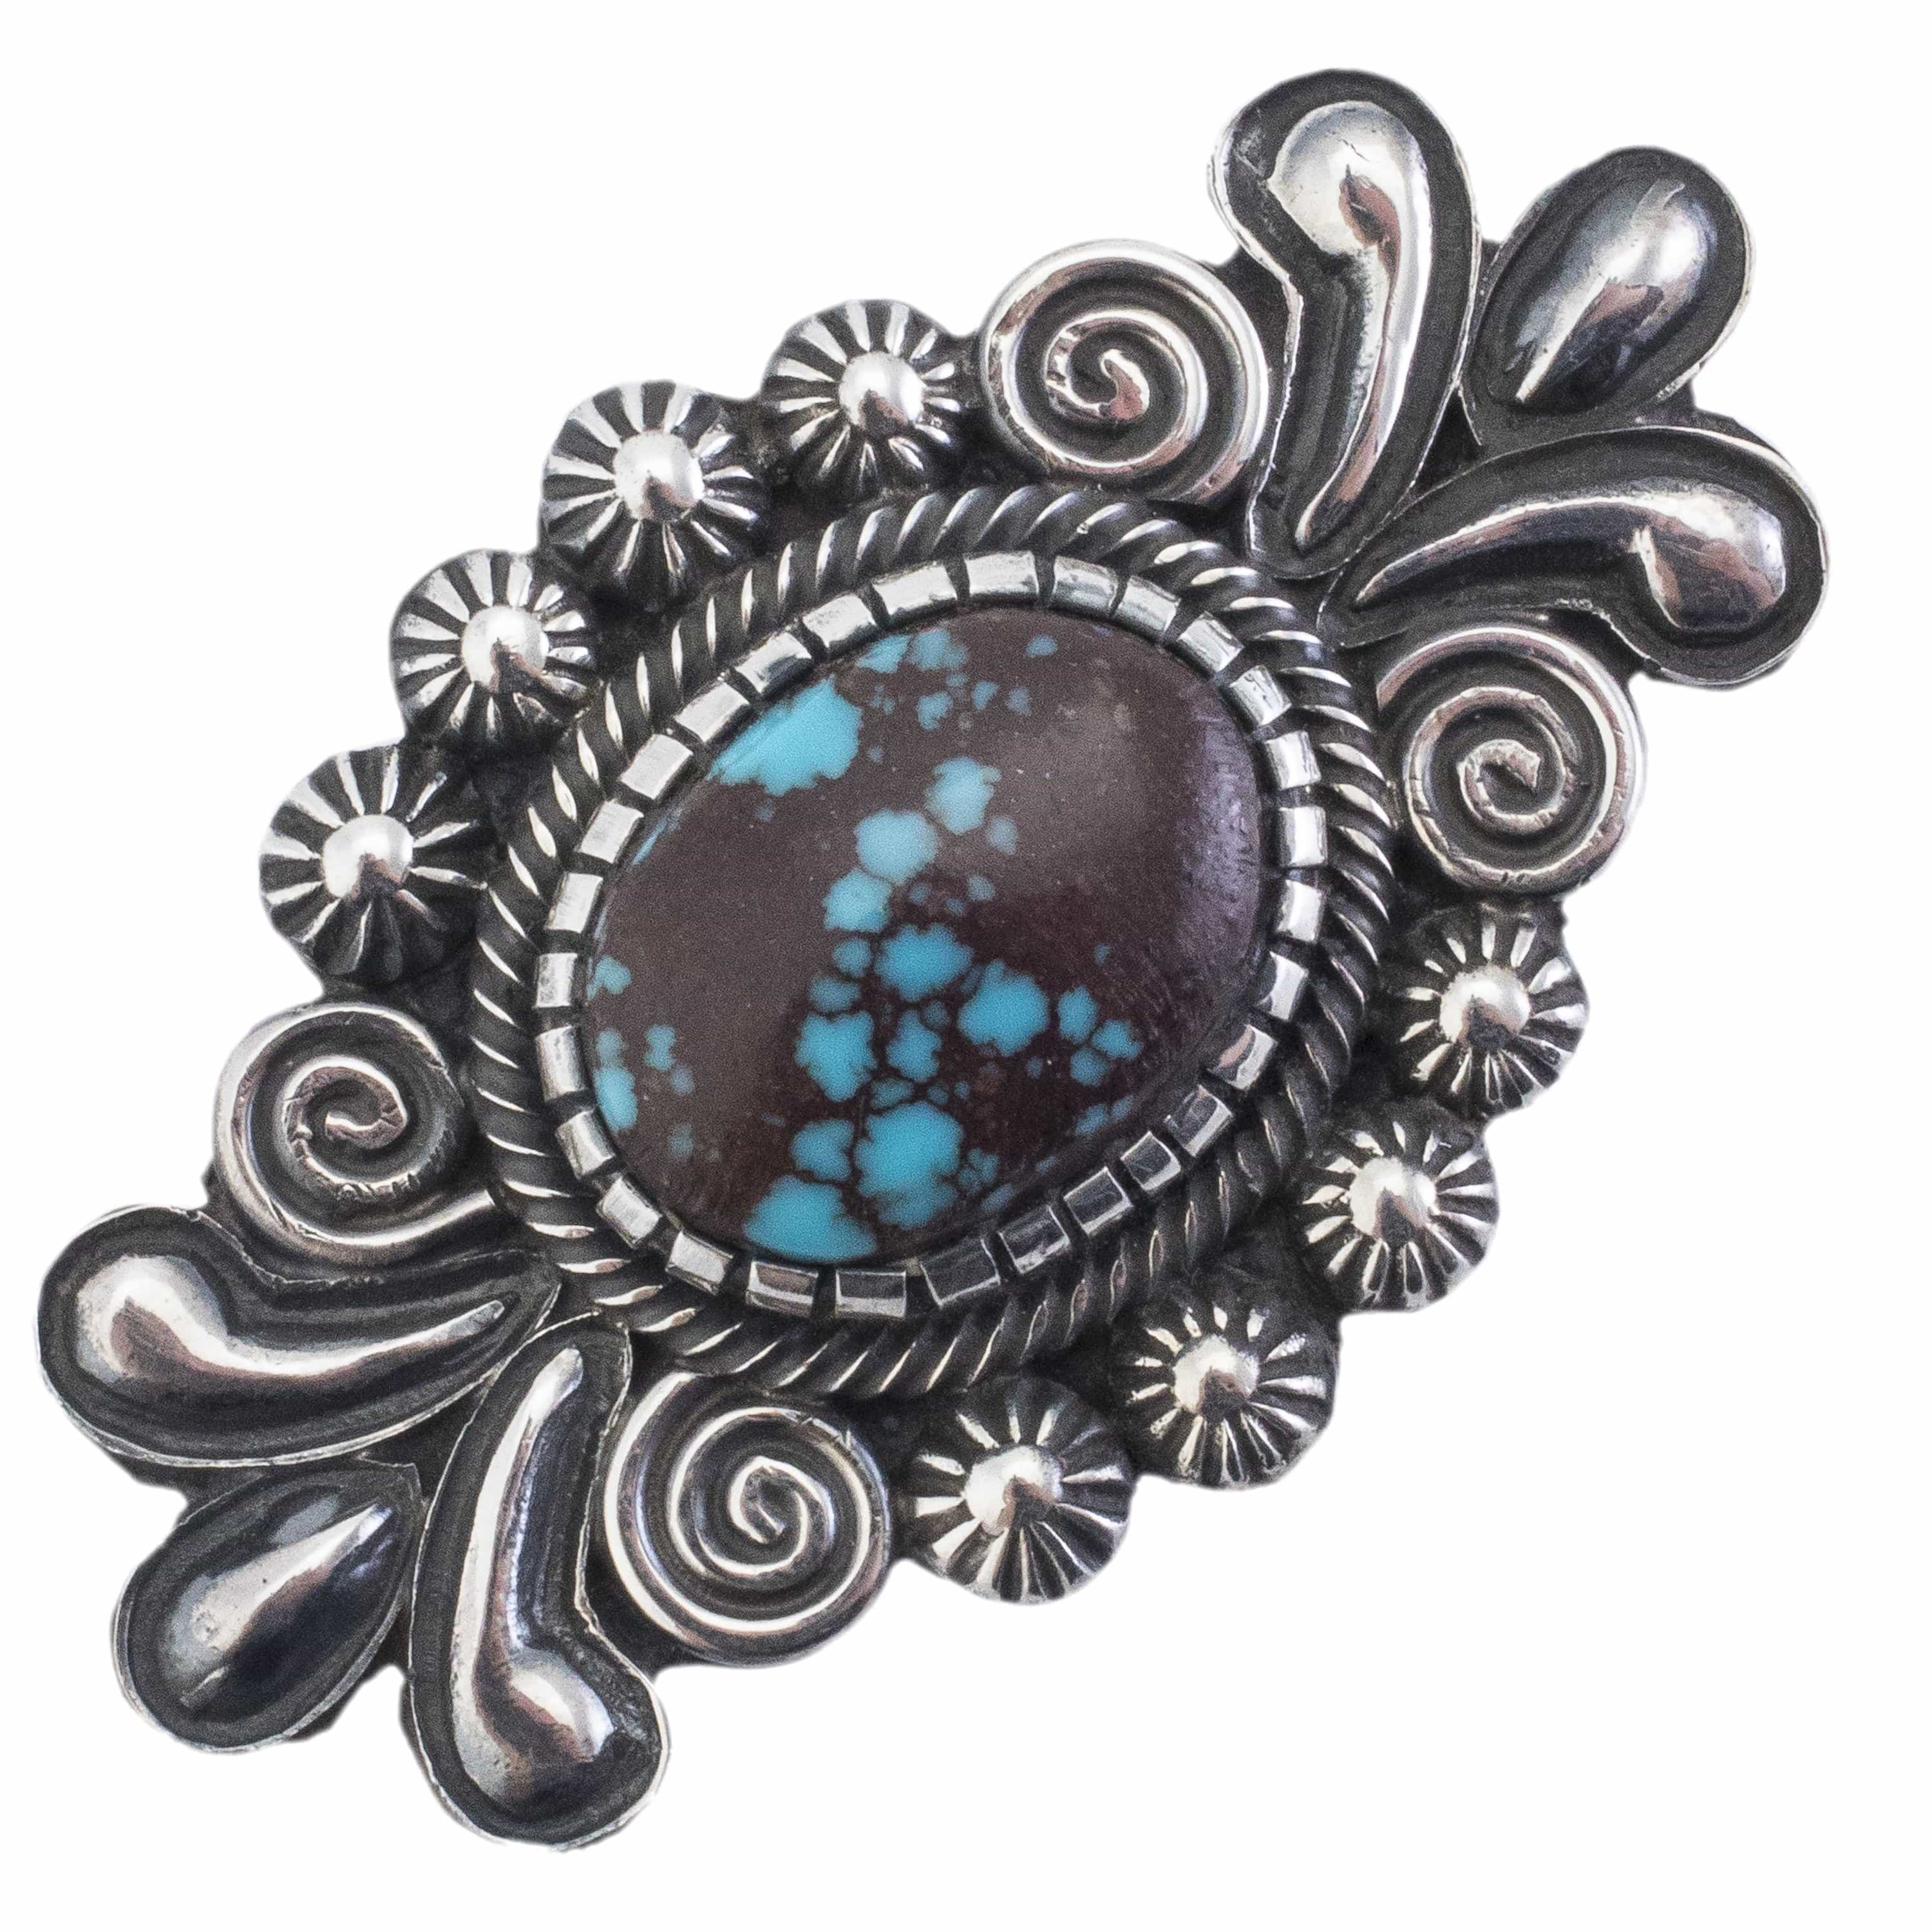 Kalifano Native American Jewelry 7 Leon Martinez Egyptian Prince Turquoise USA Native American Made 925 Sterling Silver Ring NAR3800.001.7